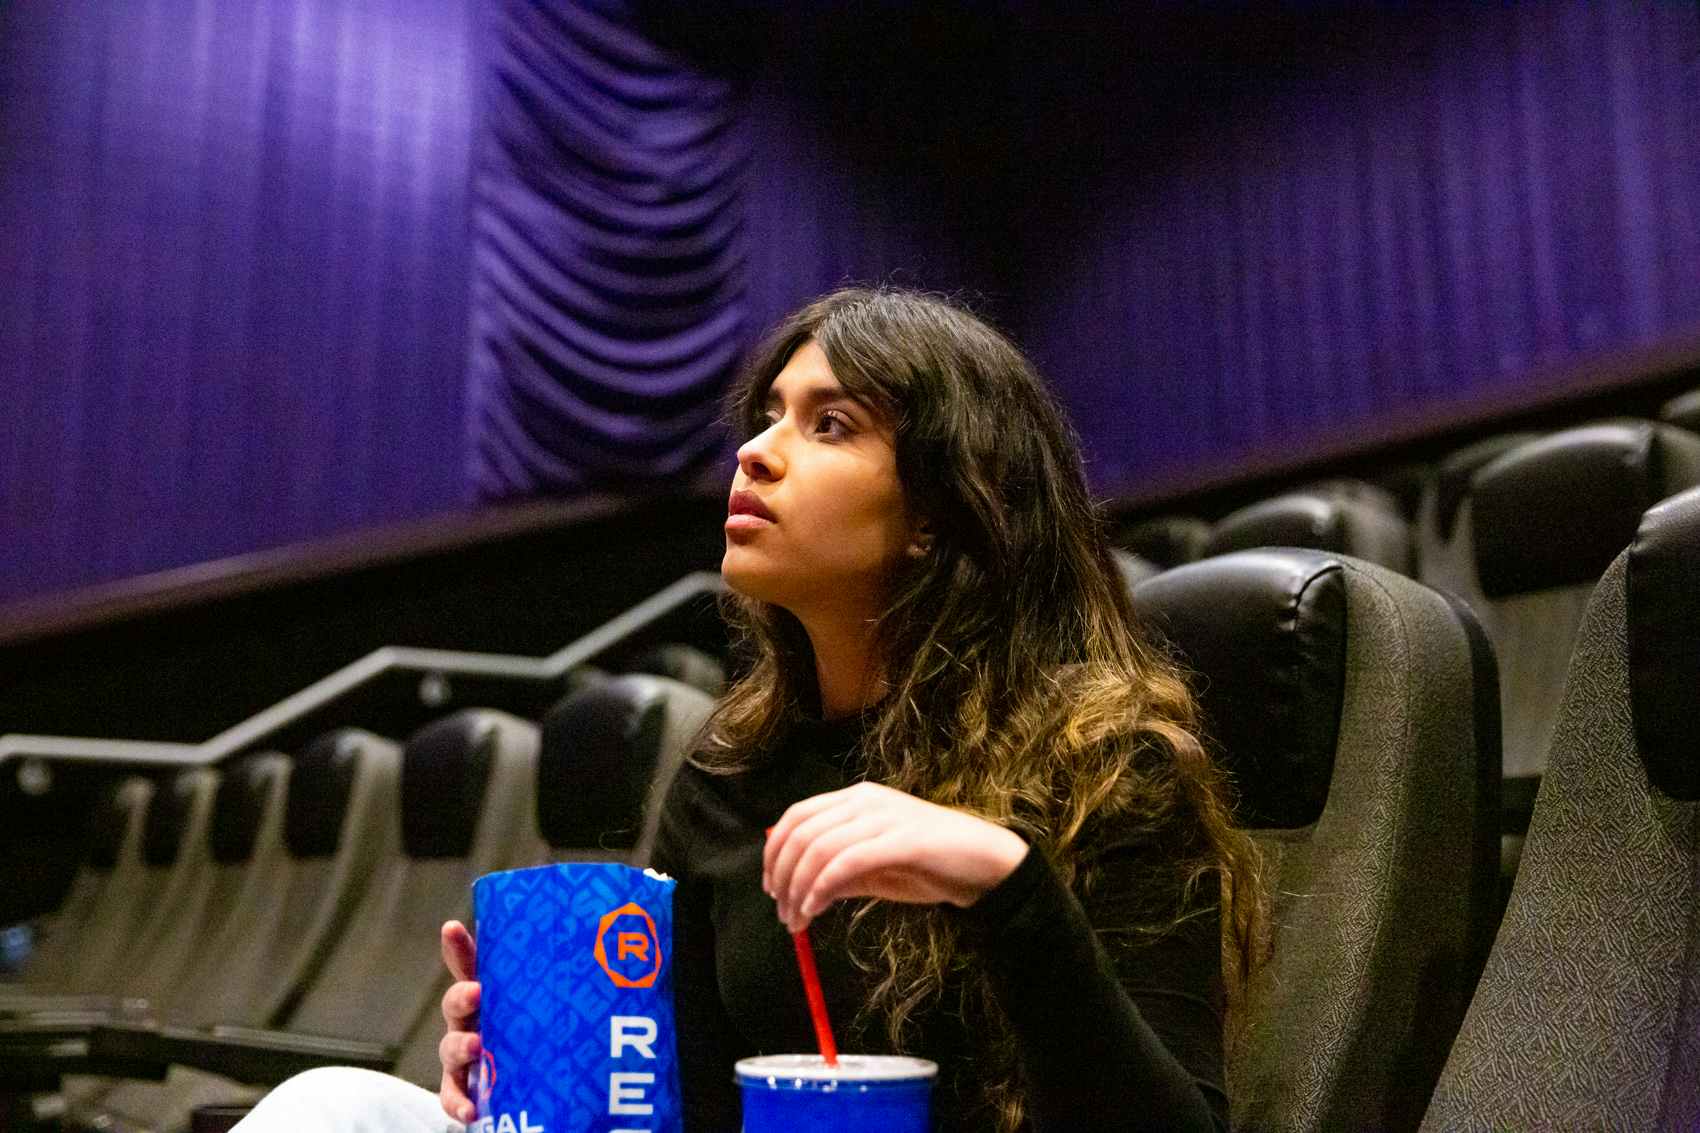 Woman watching a movie inside a theater